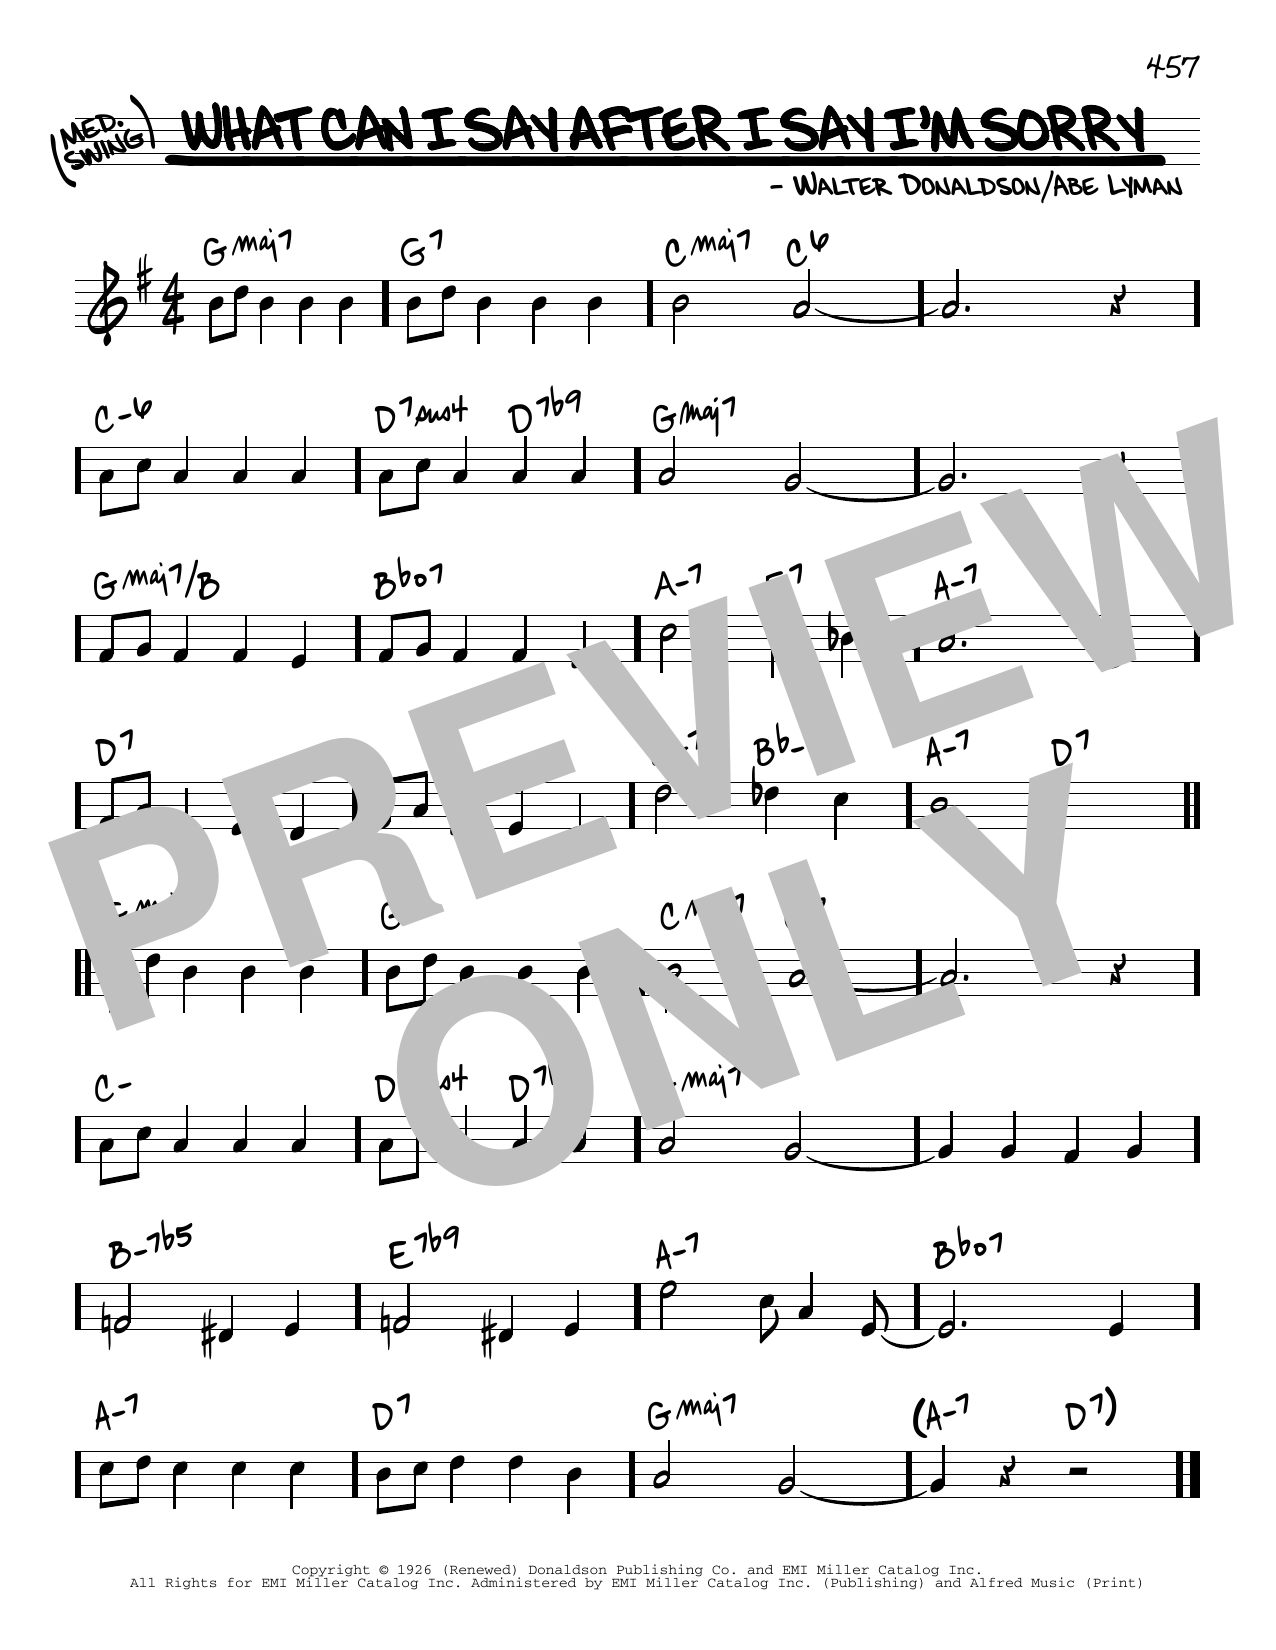 Download Abe Lyman What Can I Say After I Say I'm Sorry Sheet Music